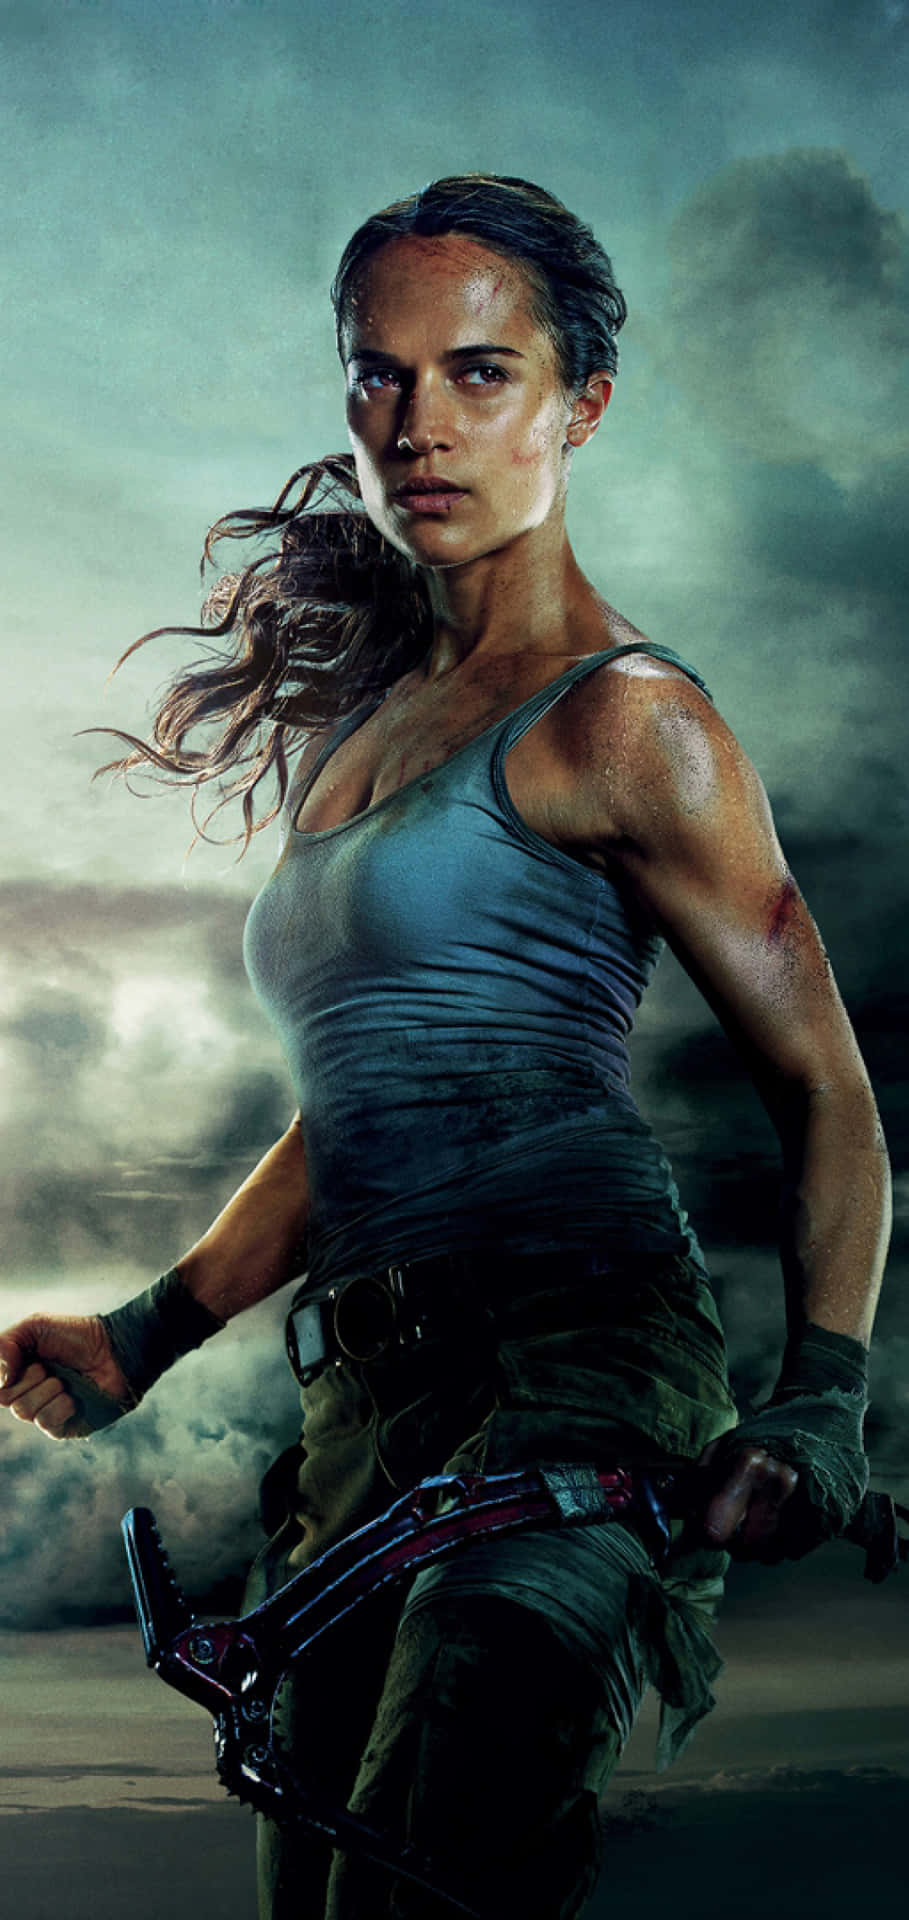 Get Ready for Adventure with Tomb Raider Phone Wallpaper